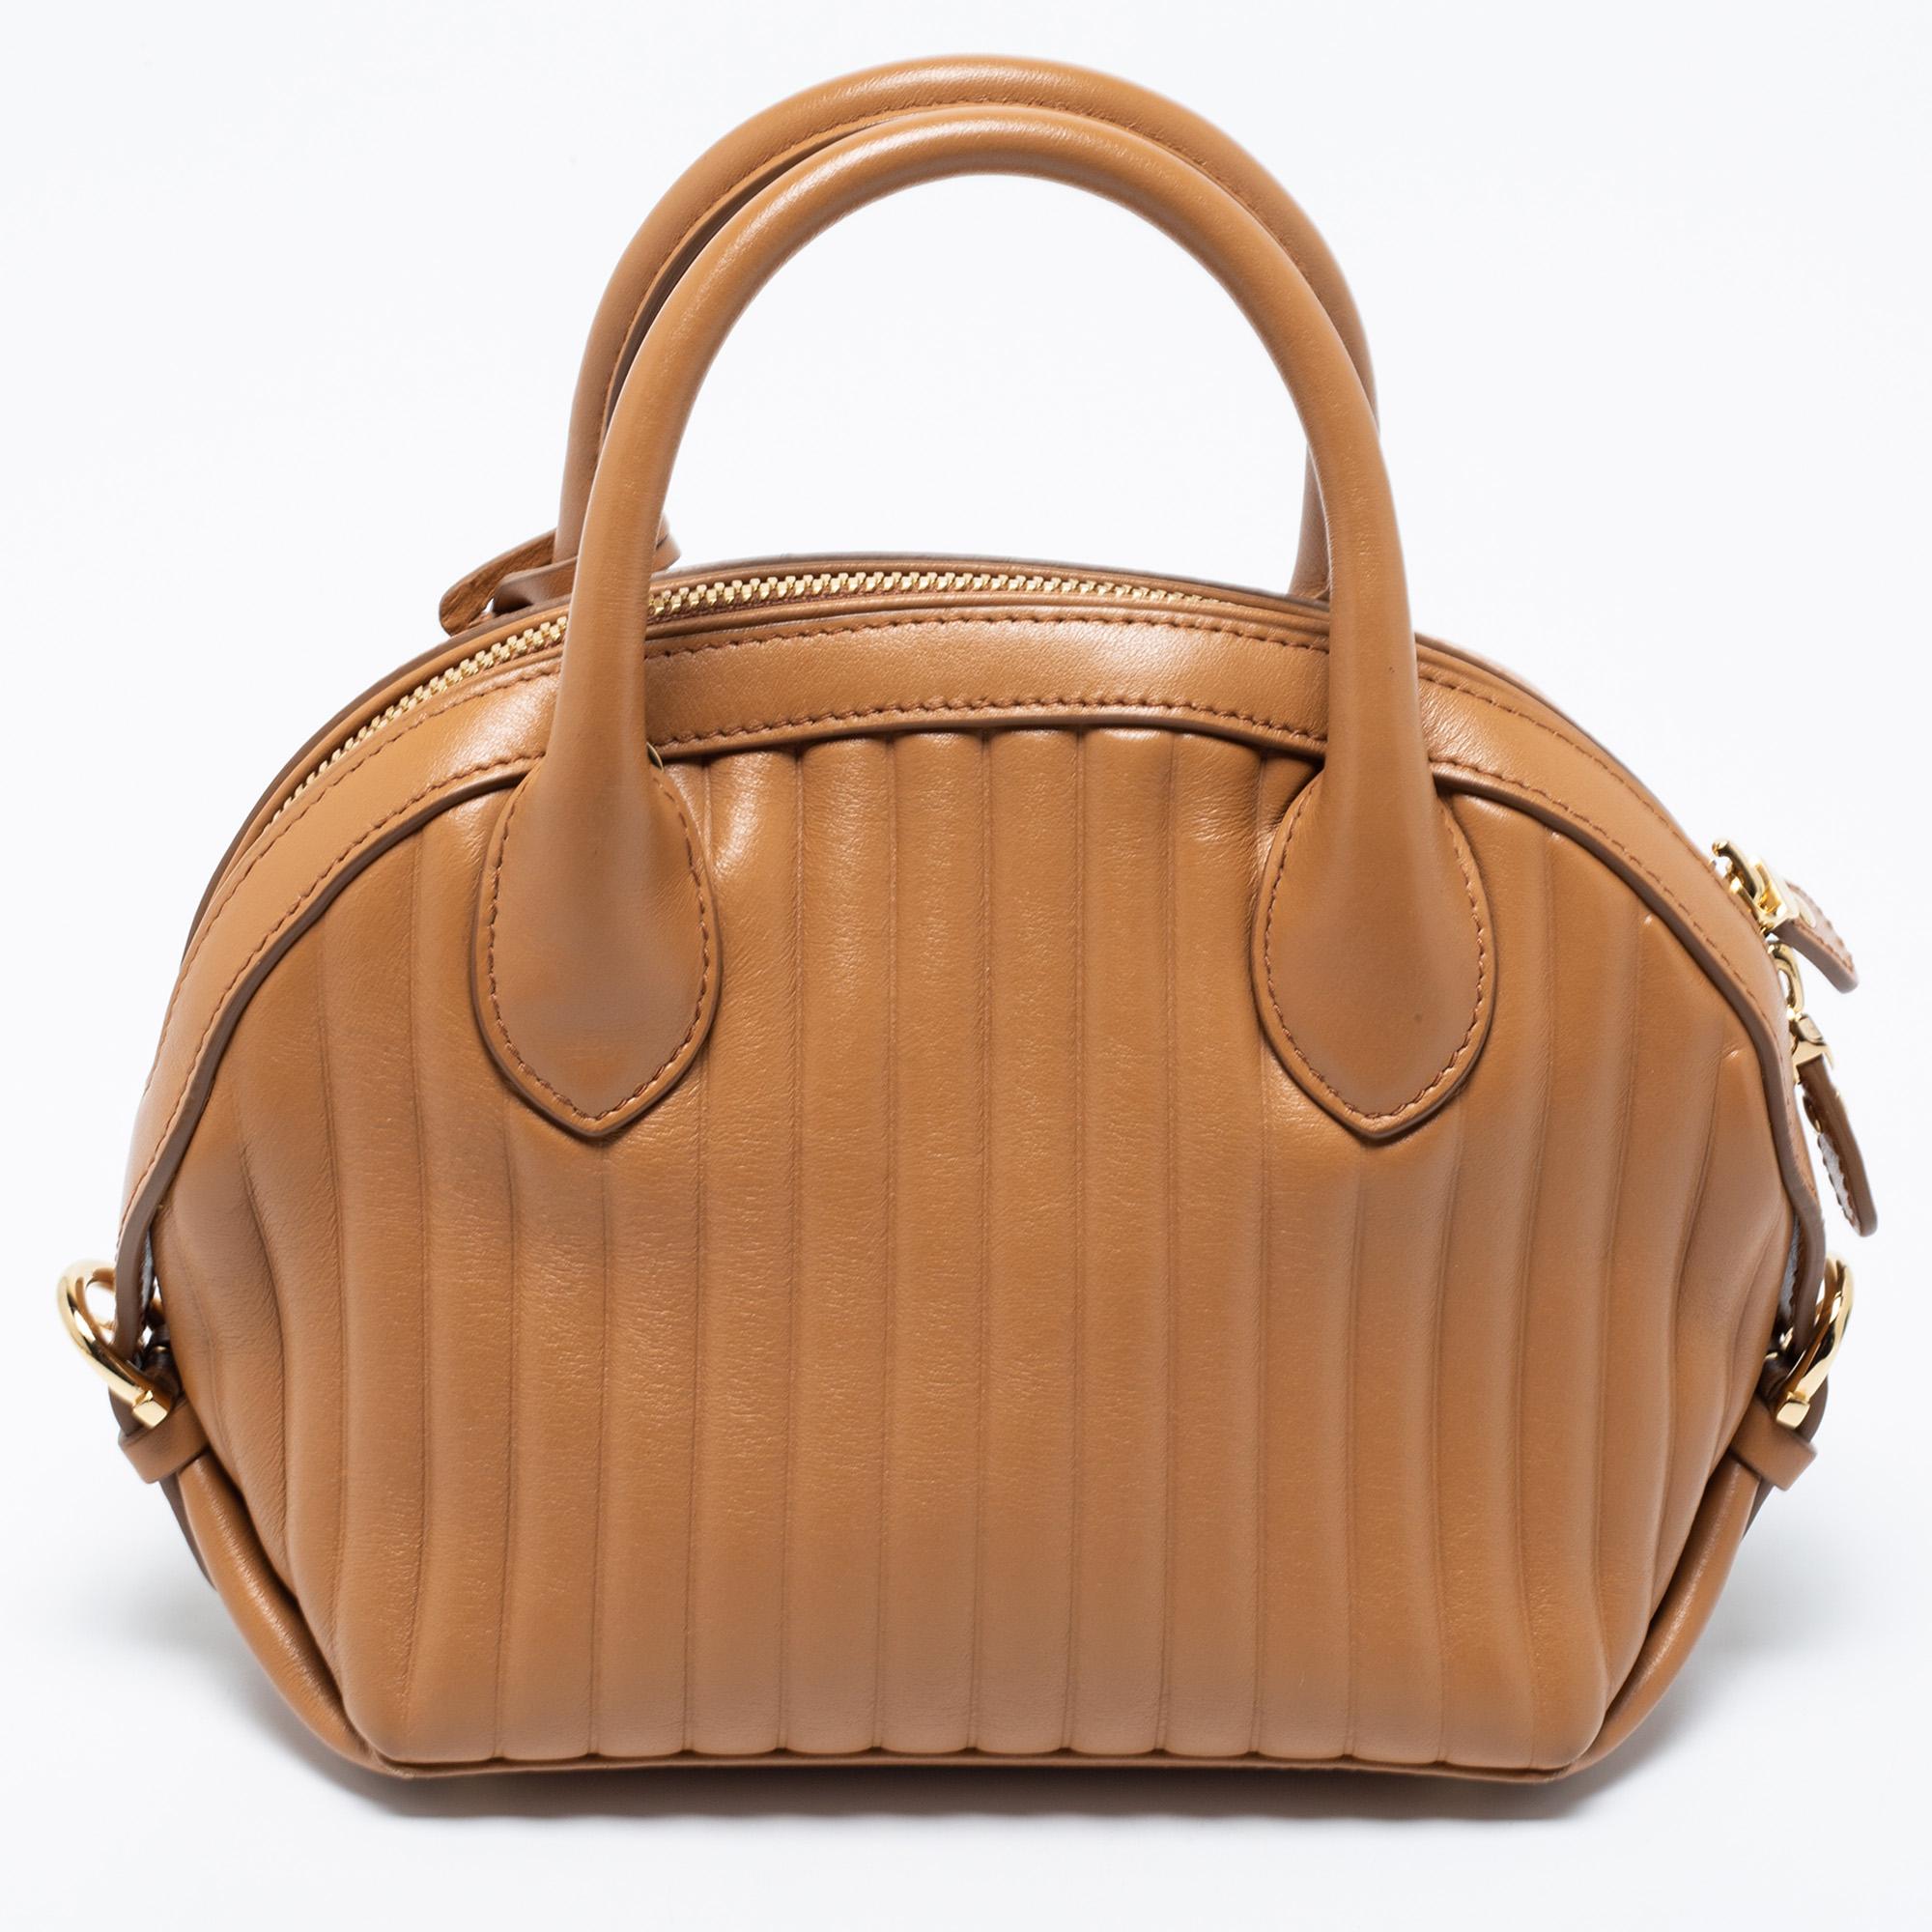 Salvatore Ferragamo's Fiamma satchel is an elegant style that aims to offer an elevating finish. Crafted using beige quilted leather, the bag is designed with a gold-tone lock on the front. It comes with dual top handles, an optional strap, and a